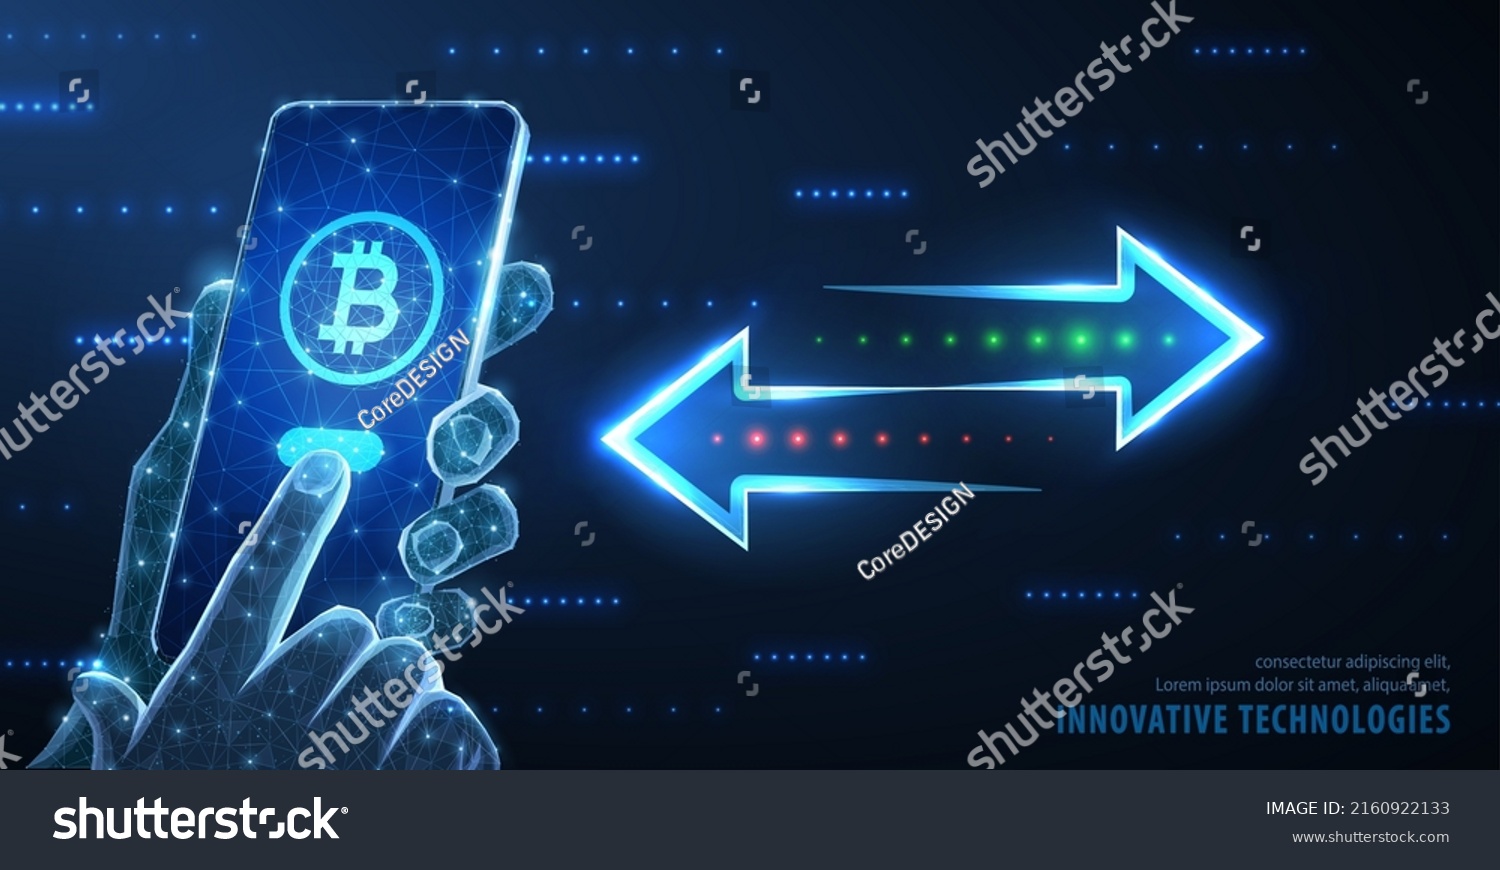 SVG of Crypto transfer. Phone in hands with bitcoin symbol and arrows. Money exchange, mobile banking, digital wallet, fast payment, send transaction, online transfer, smart pay, crypto transfer concept. svg